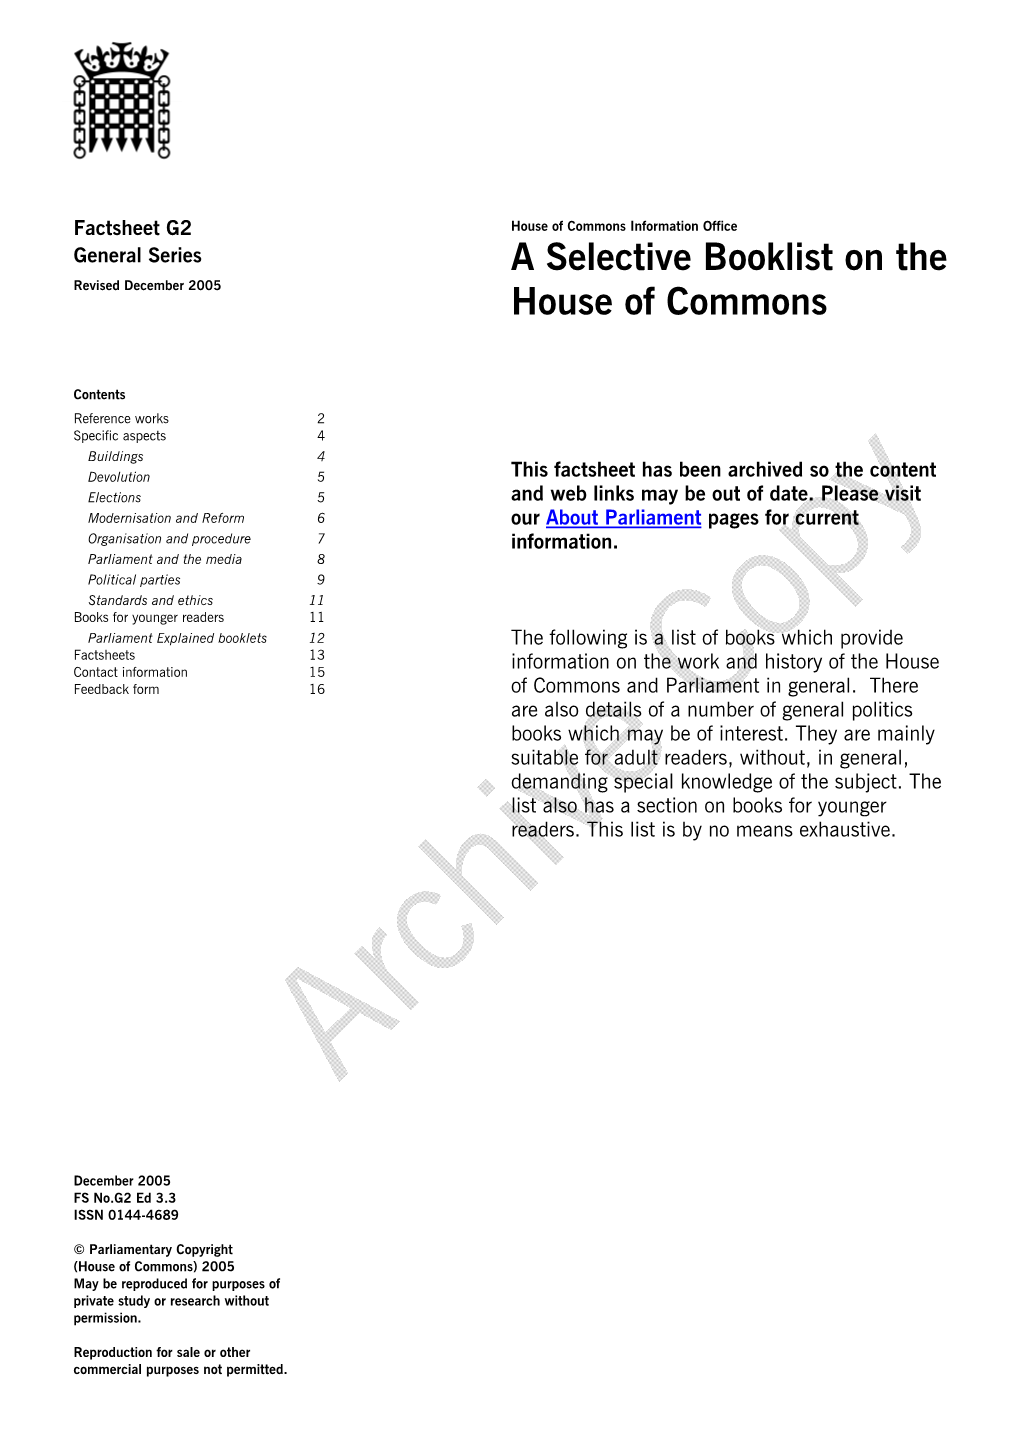 A Selective Booklist on the House of Commons House of Commons Information Office Factsheet G2